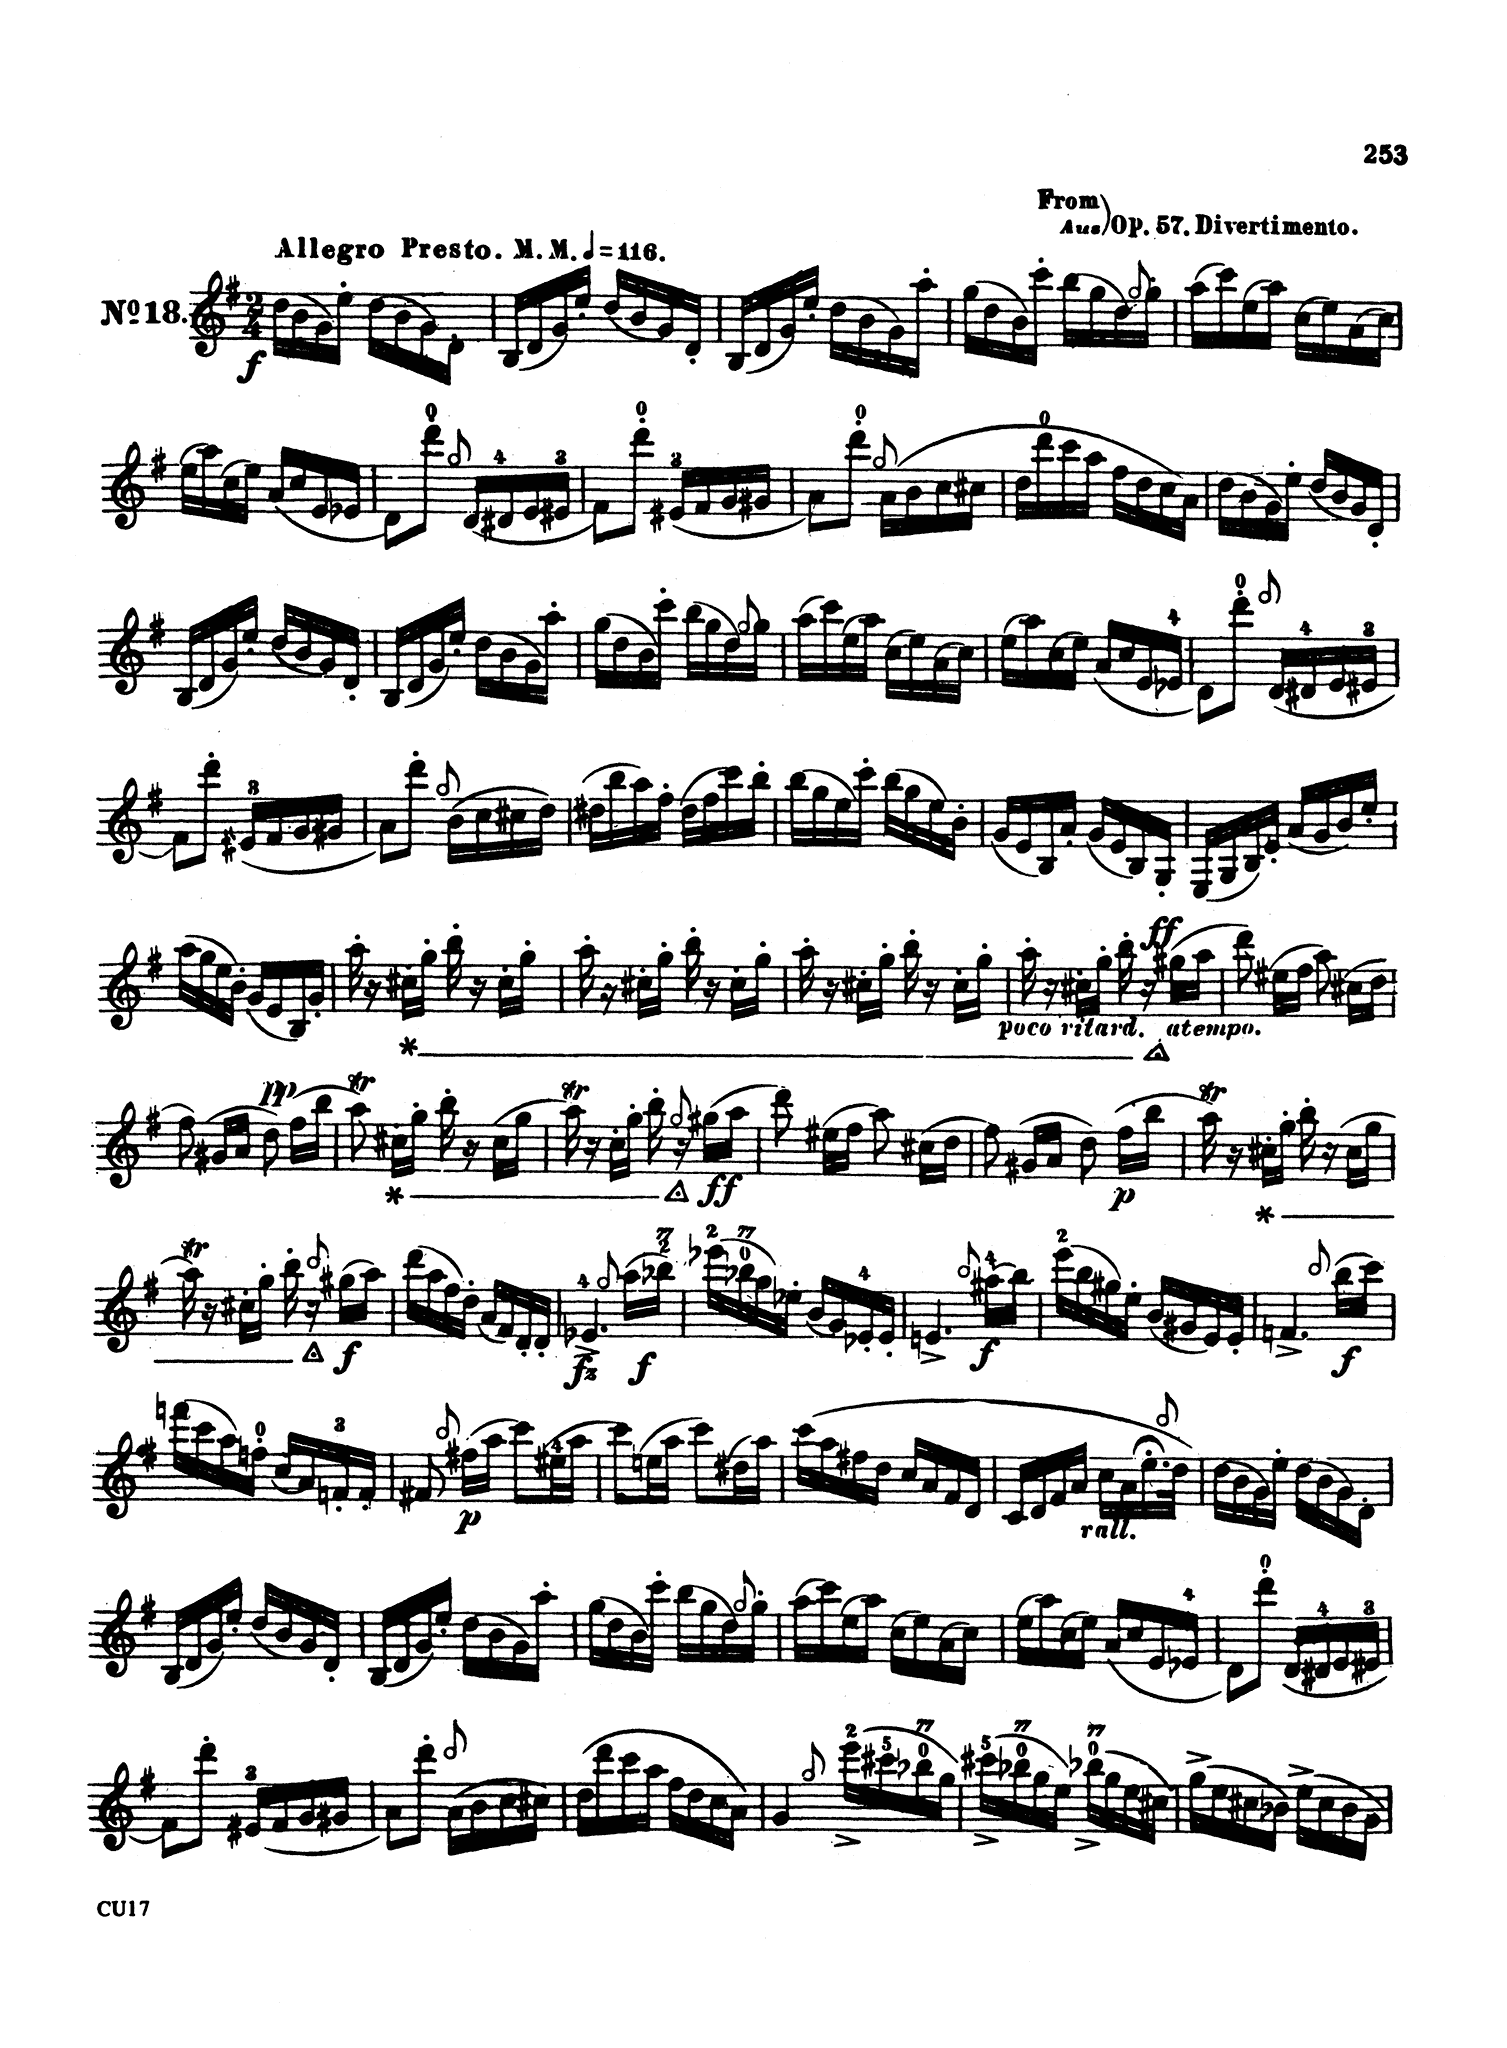 Complete Clarinet Method, Op. 64: Division 5 Page 253